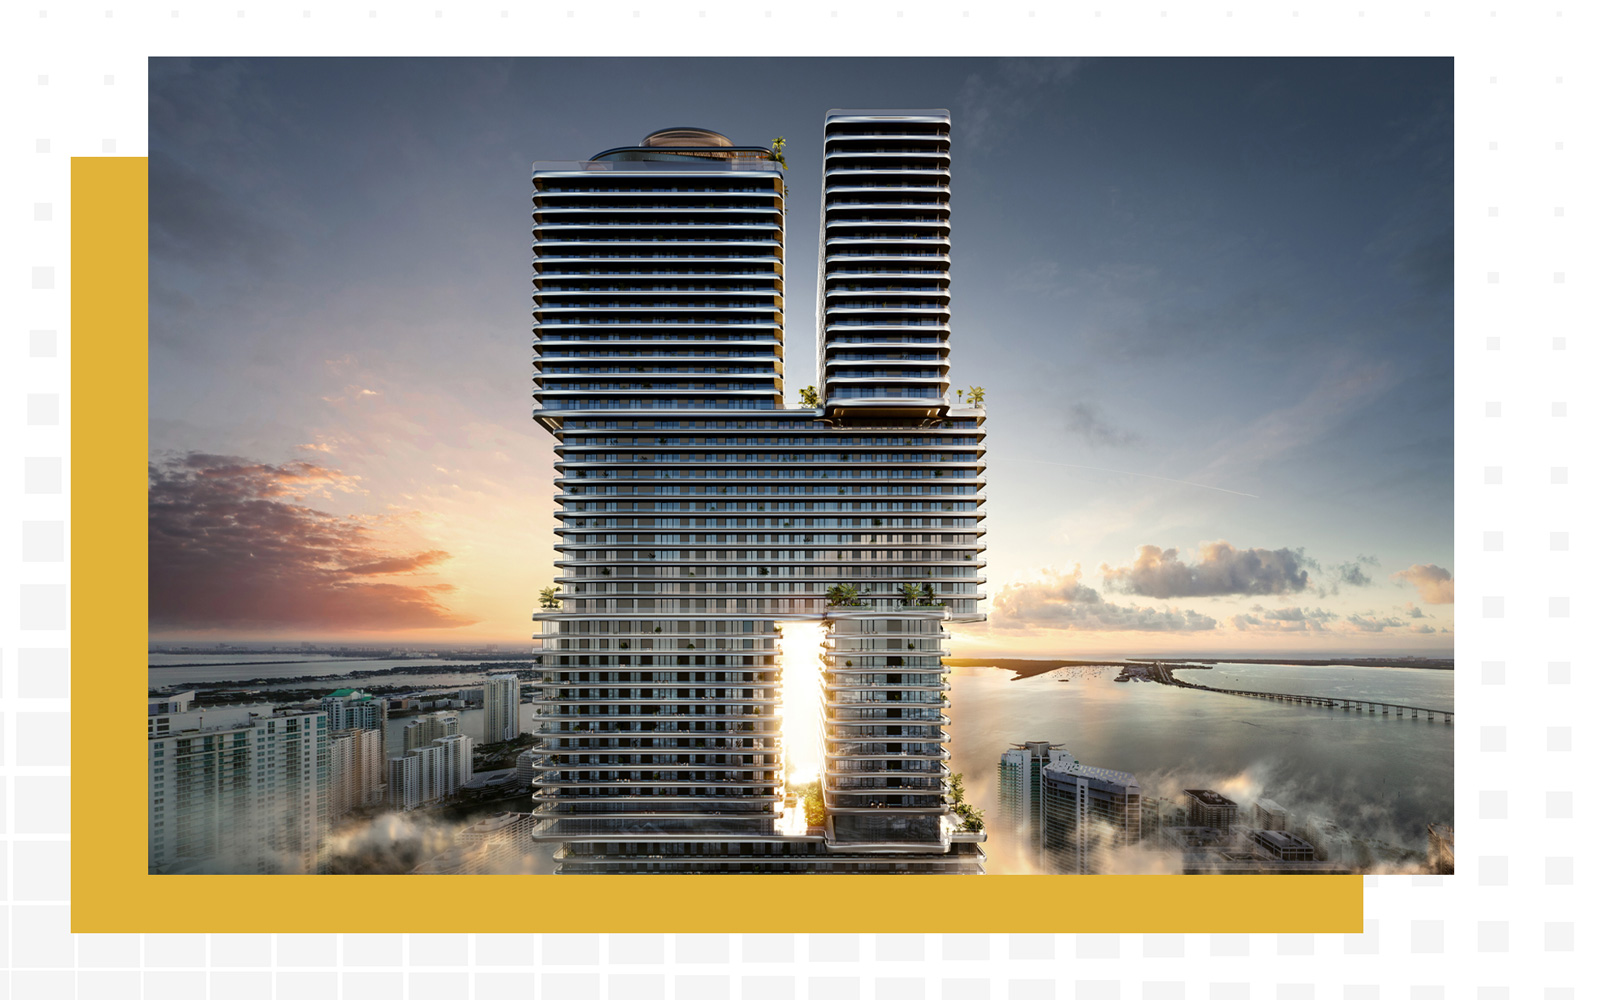 Mercedes-Benz Joins Condo Craze With 67-Story Luxury Miami Tower